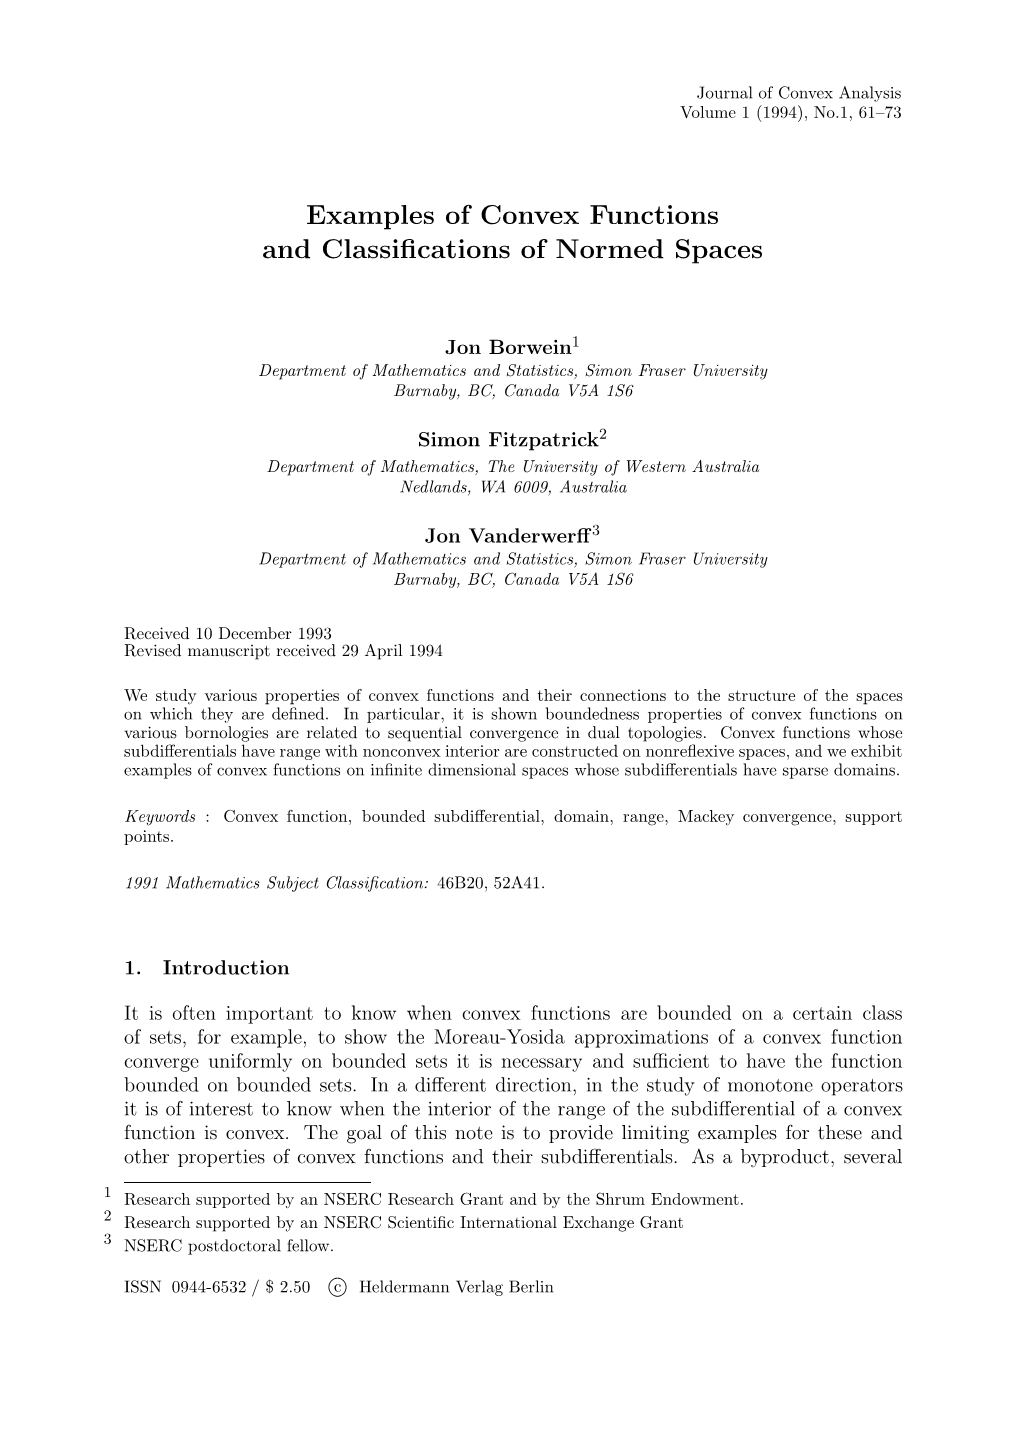 Examples of Convex Functions and Classifications of Normed Spaces